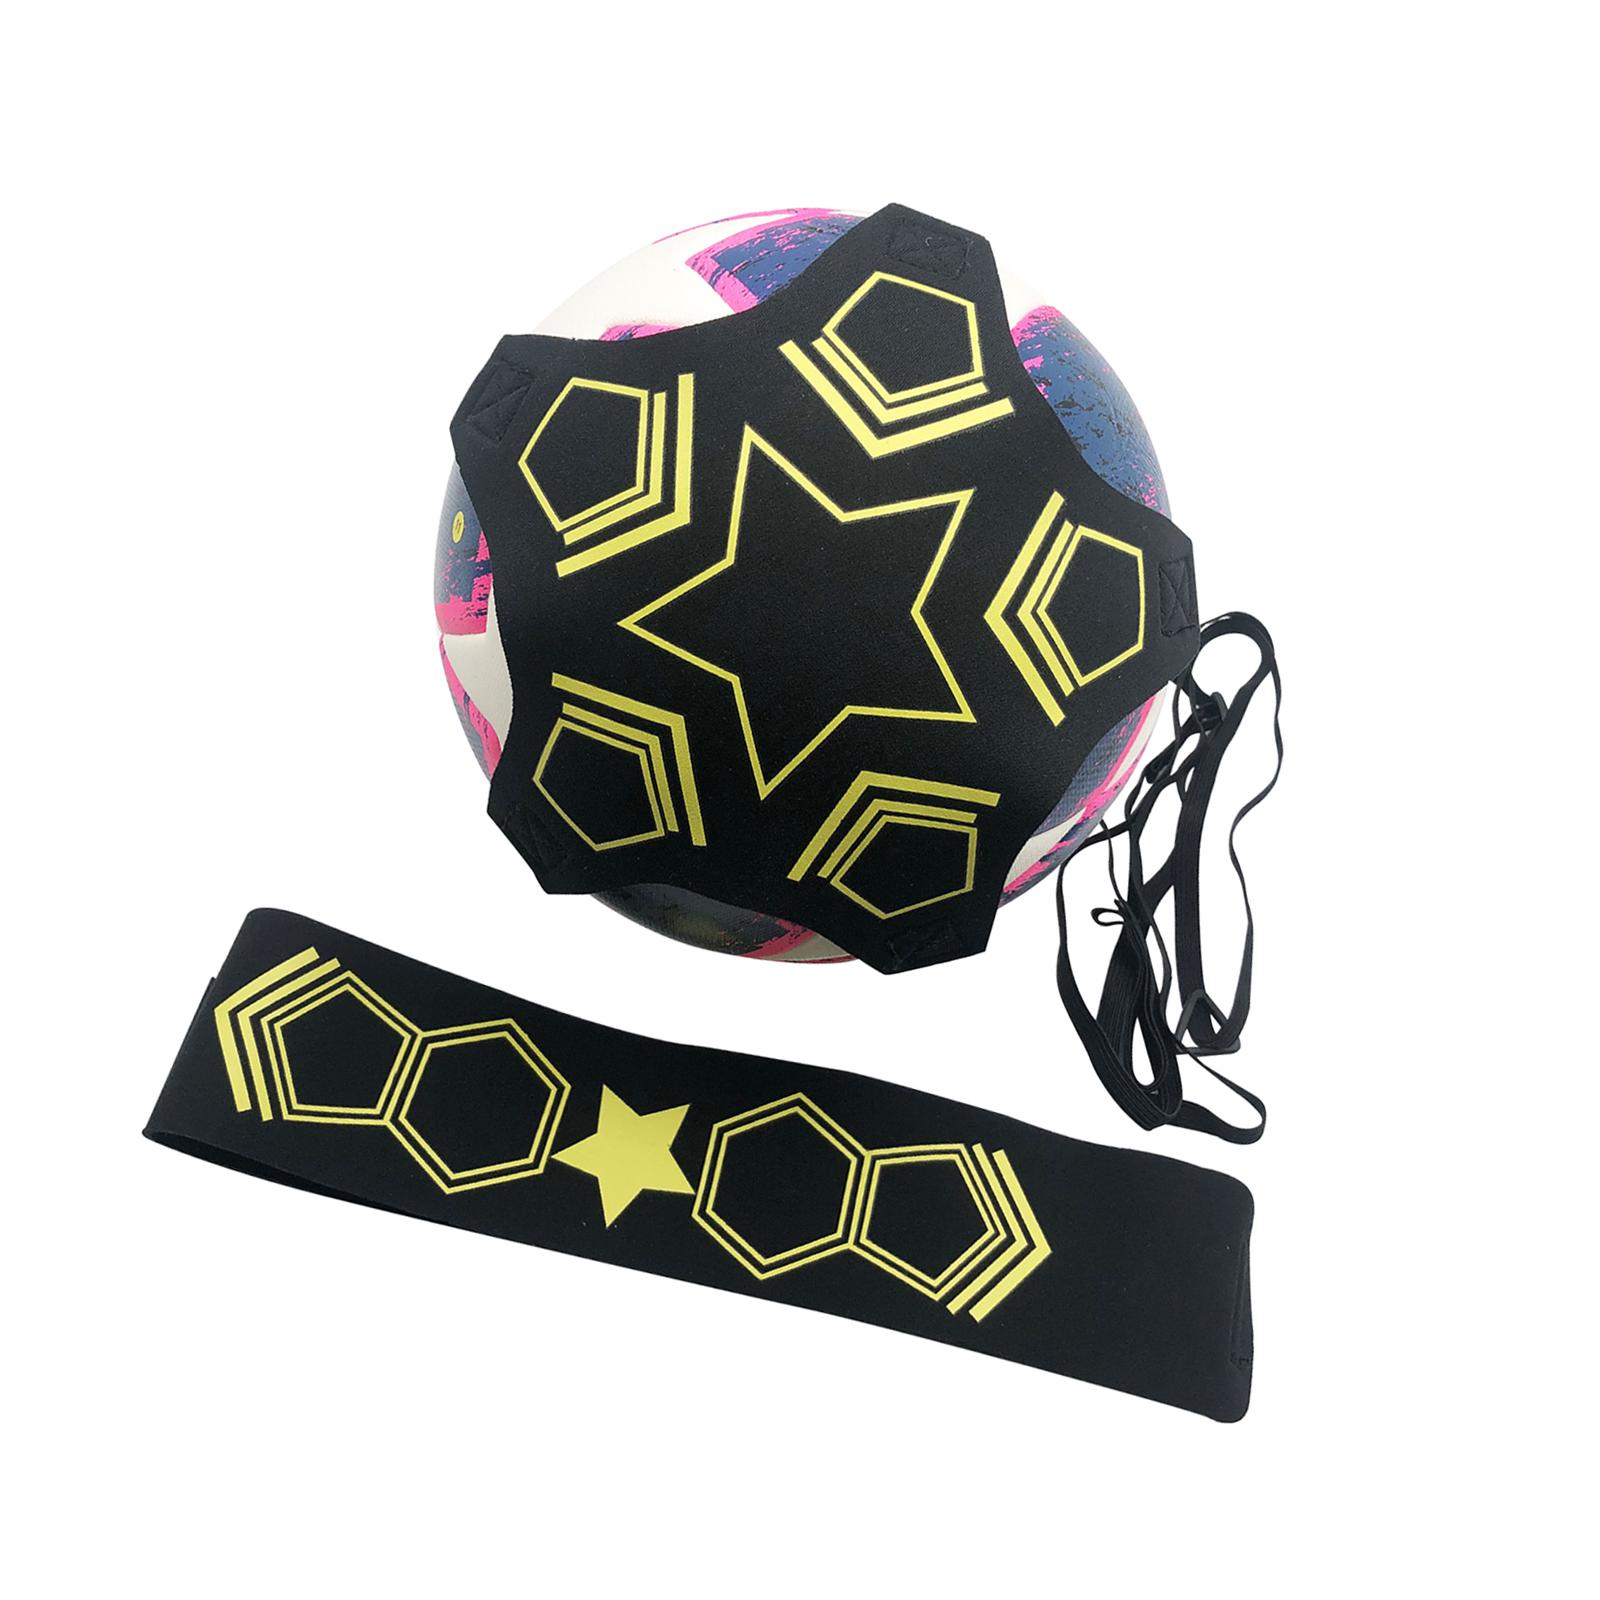 Kick Throw Solo Practice Fits Ball 3, 4,and 5 Game Ball Hands Soccer Trainer Star